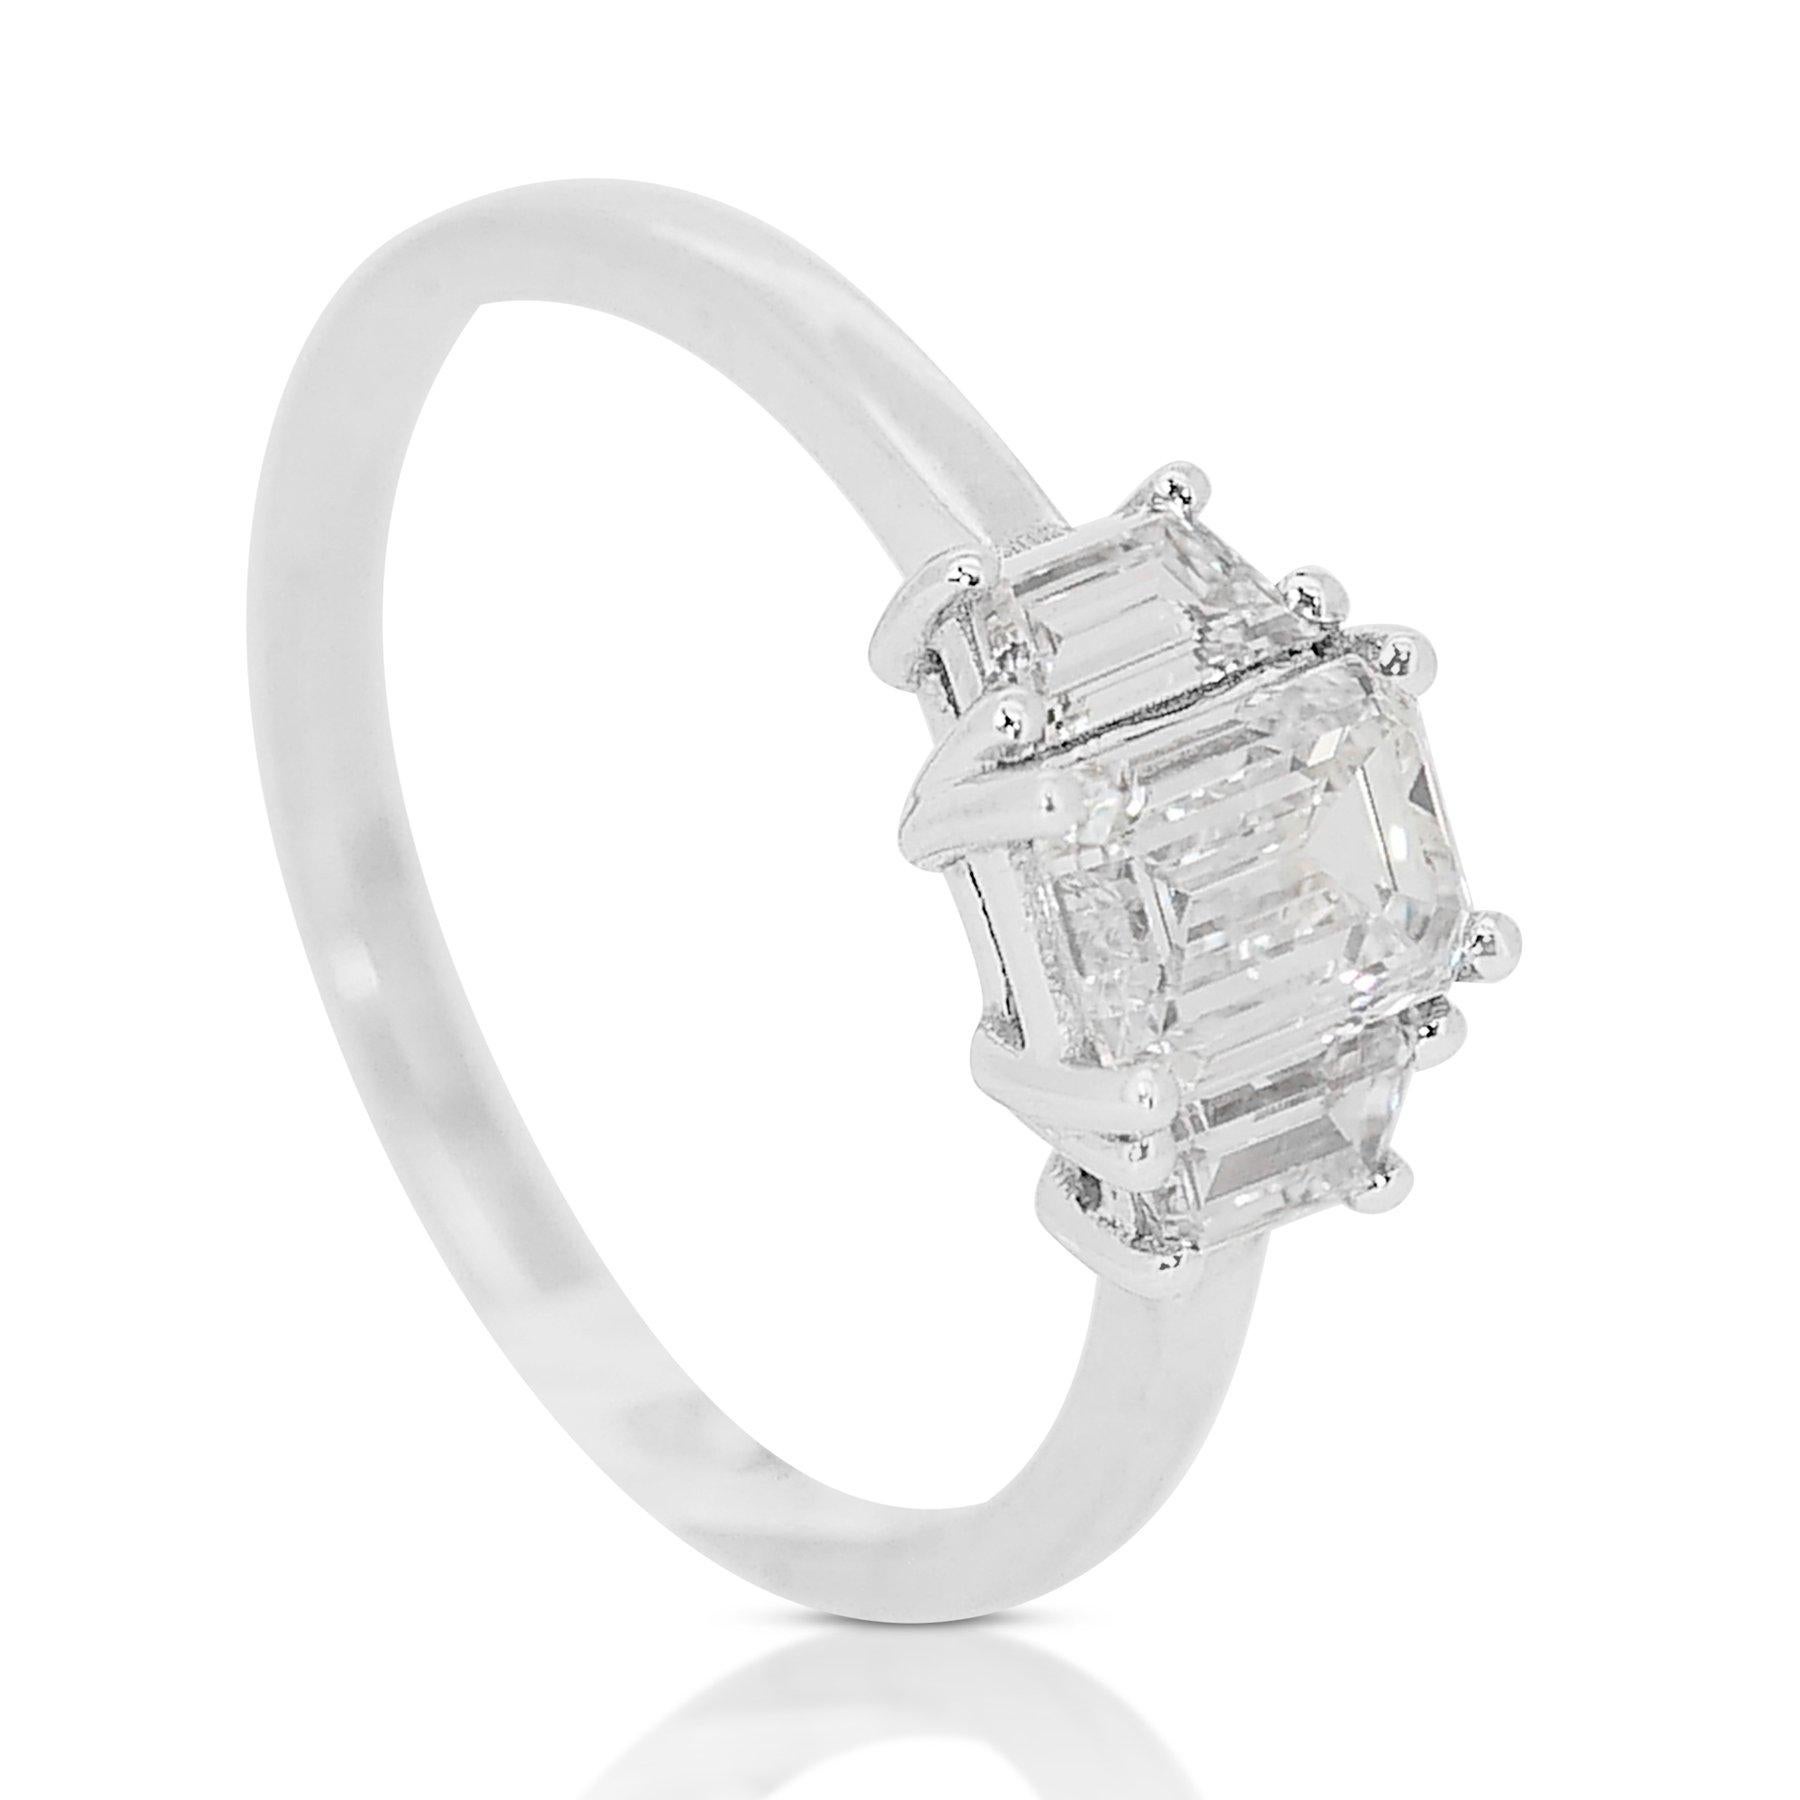 Bright 18K White Gold Natural Diamond 3 Stone Ring w/1.35 Carat - GIA Certified 

Featuring our radiant 18K White Gold Natural Diamond 3 Stone Ring, a brilliant embodiment of timeless sophistication and elegance. This stunning piece features a